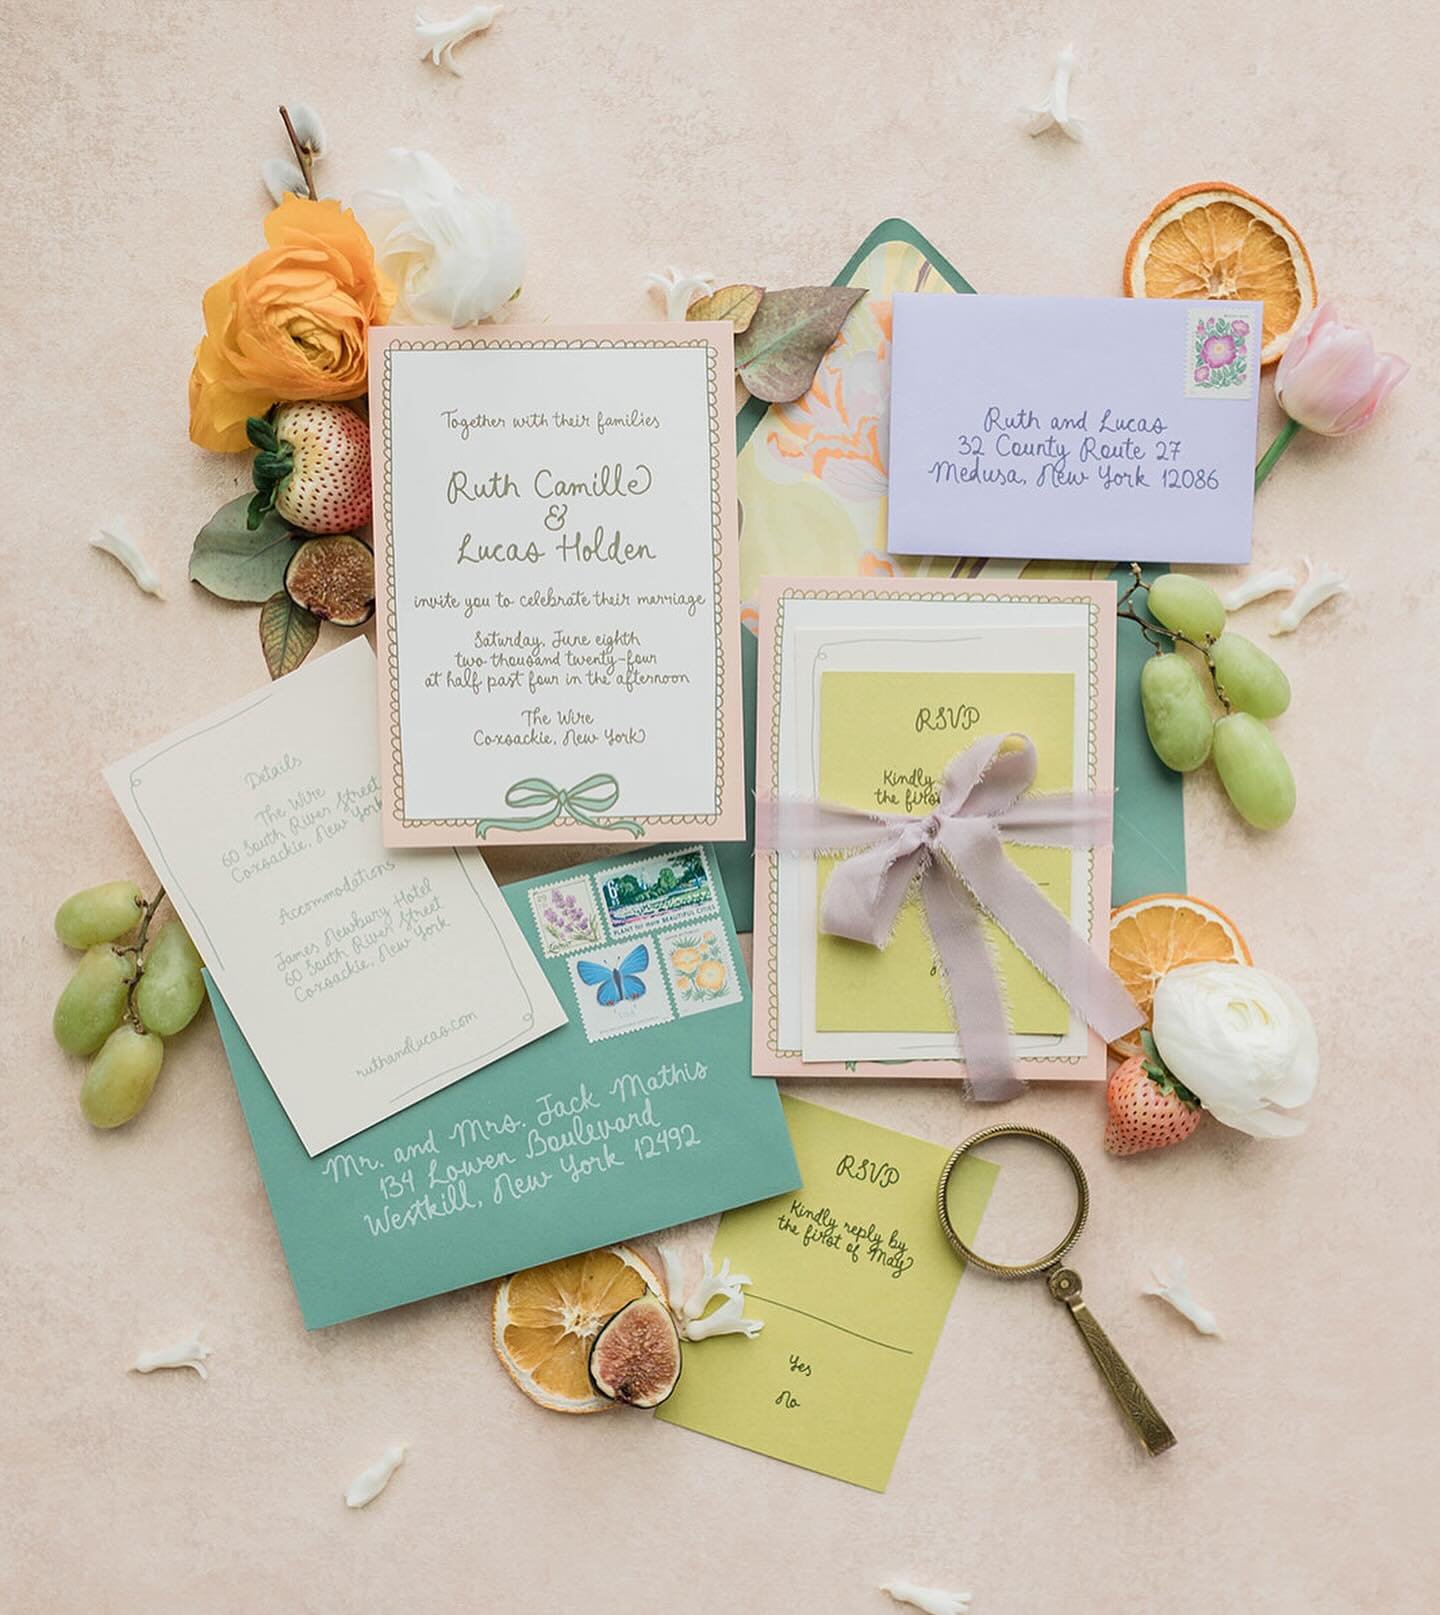 Drooling over this colorful invitation suite 🍊🍓

Planning + Education: @kimtrangphoto / @maisiesnyderphoto
Design + Planning @elevatedeventsbysm
Venue: @wireeventcenter
Florals: @goodefarm
Stationary: @hollywinnieco
Cake: @vicidesignny
Rentals: @ev